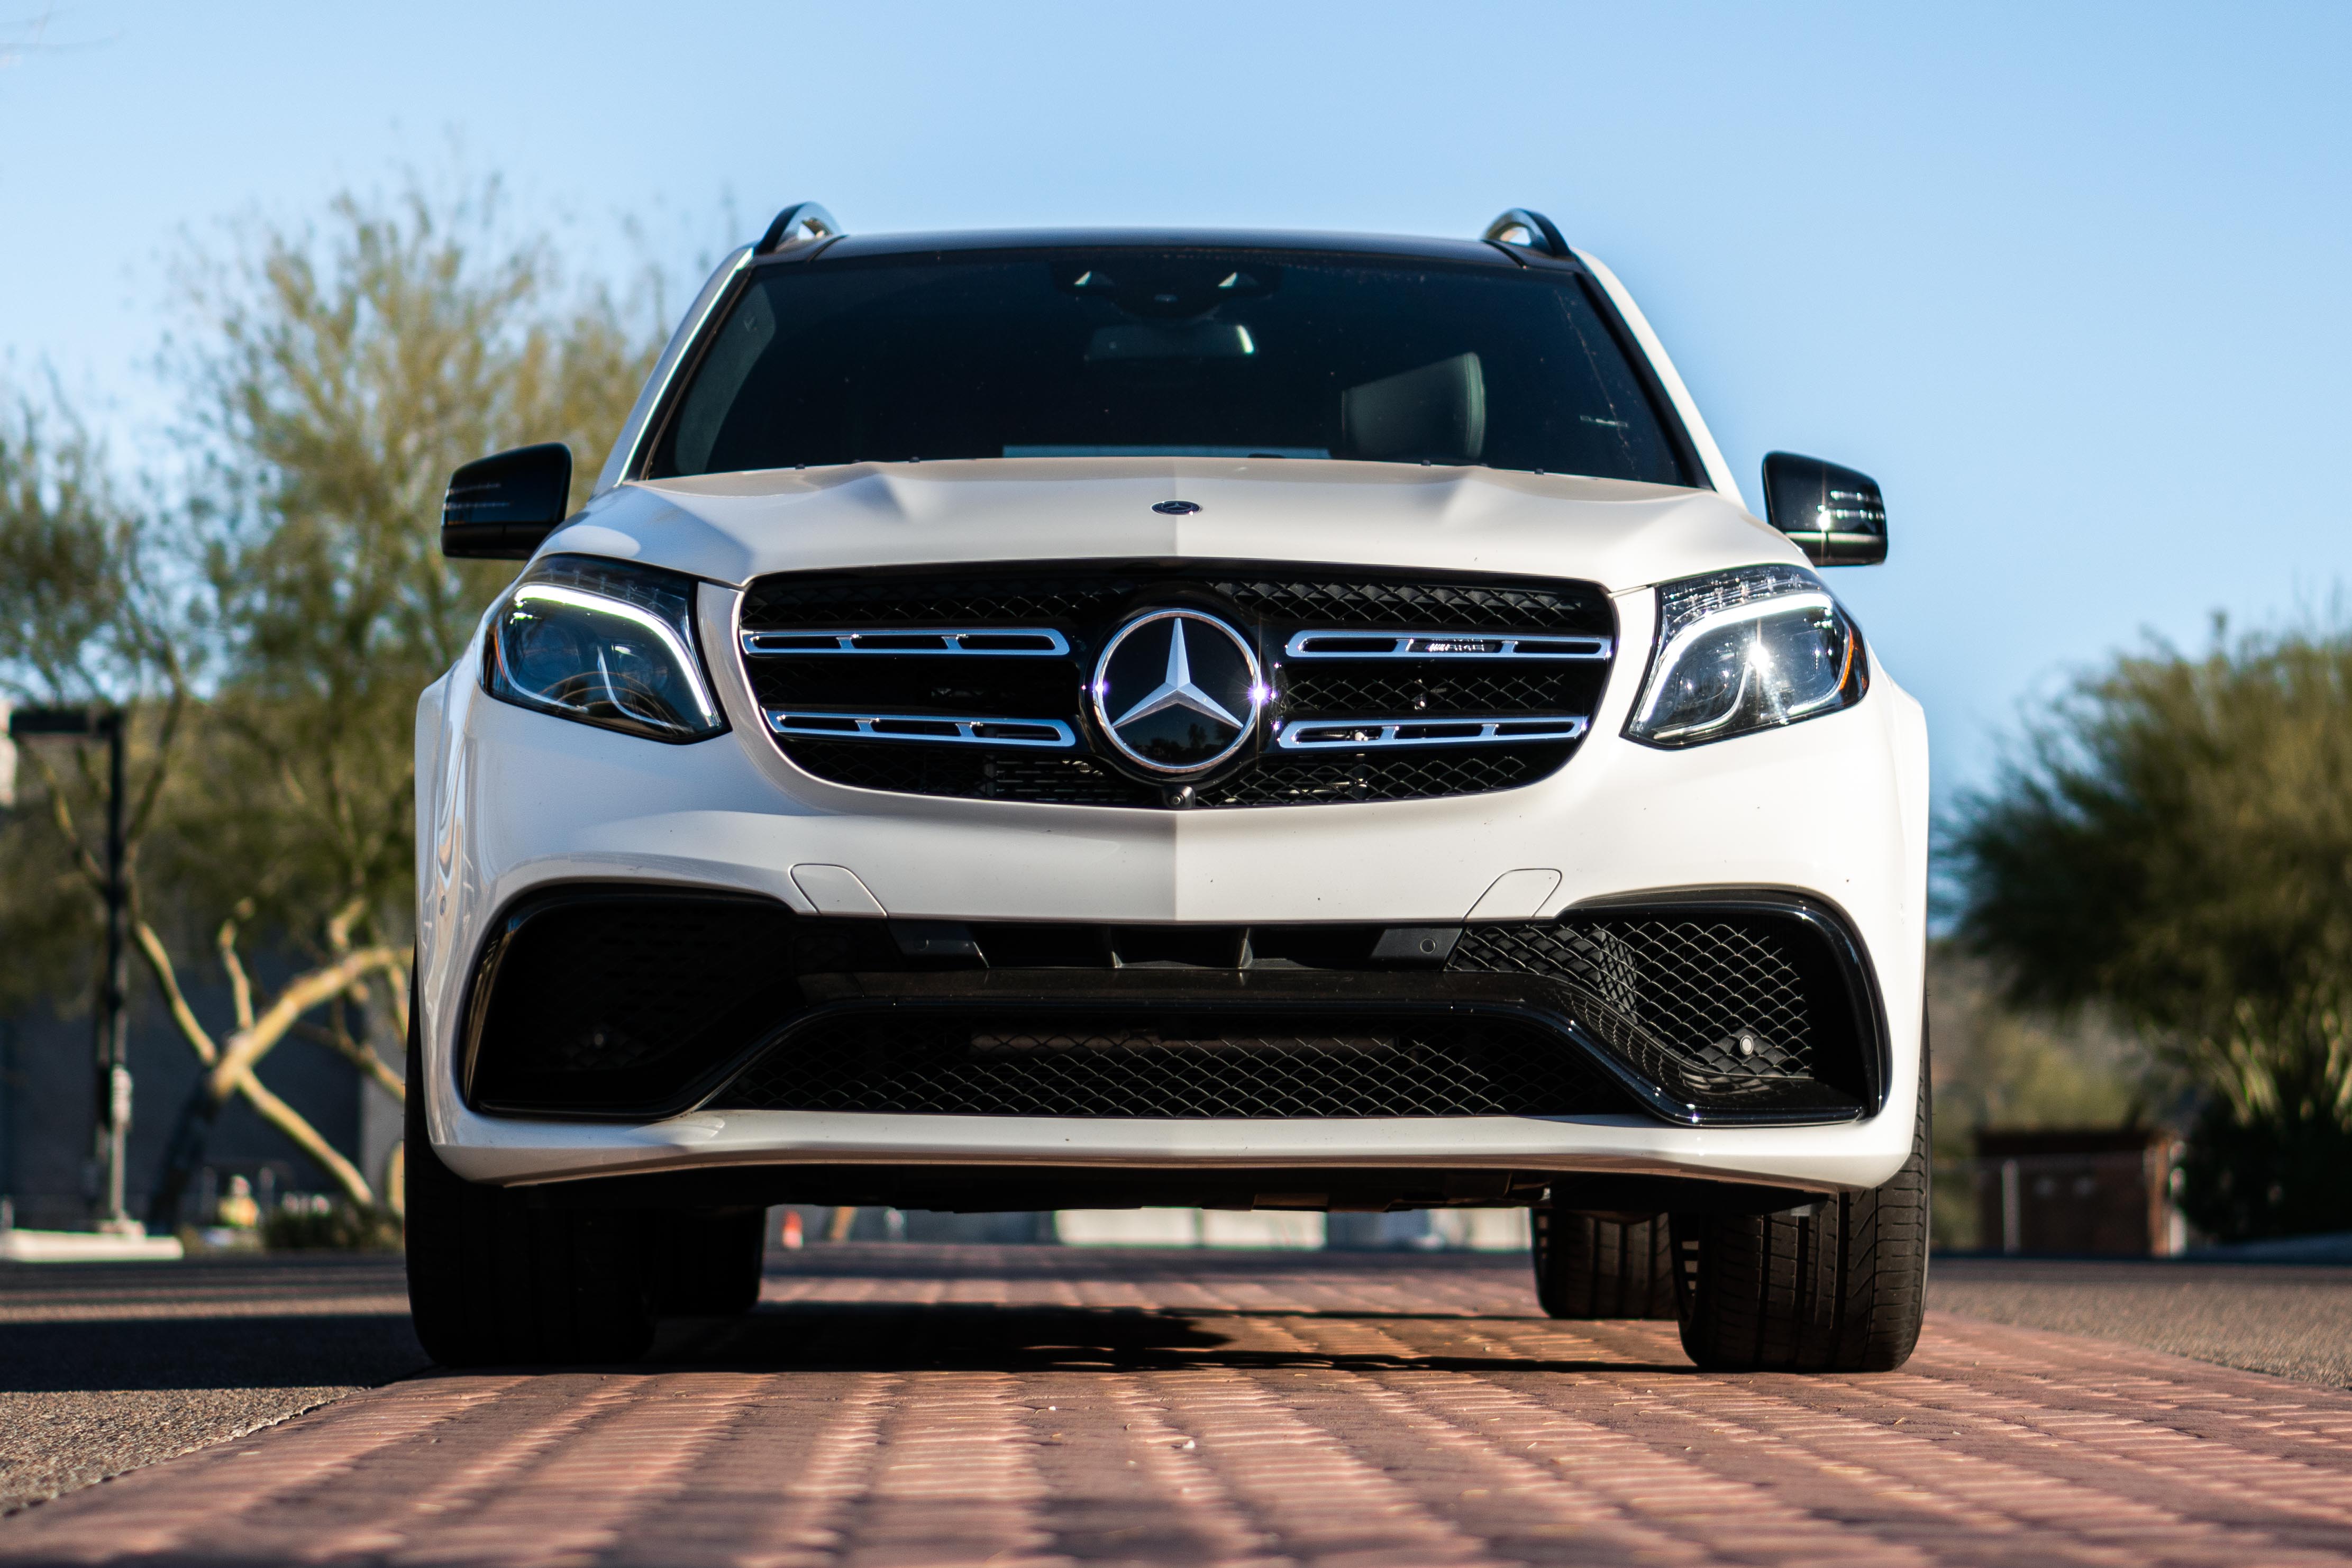 2019 Mercedes-Benz AMG GLS 63, 2019 Mercedes-Benz AMG GLS 63 is absurd in the best ways, ClassicCars.com Journal